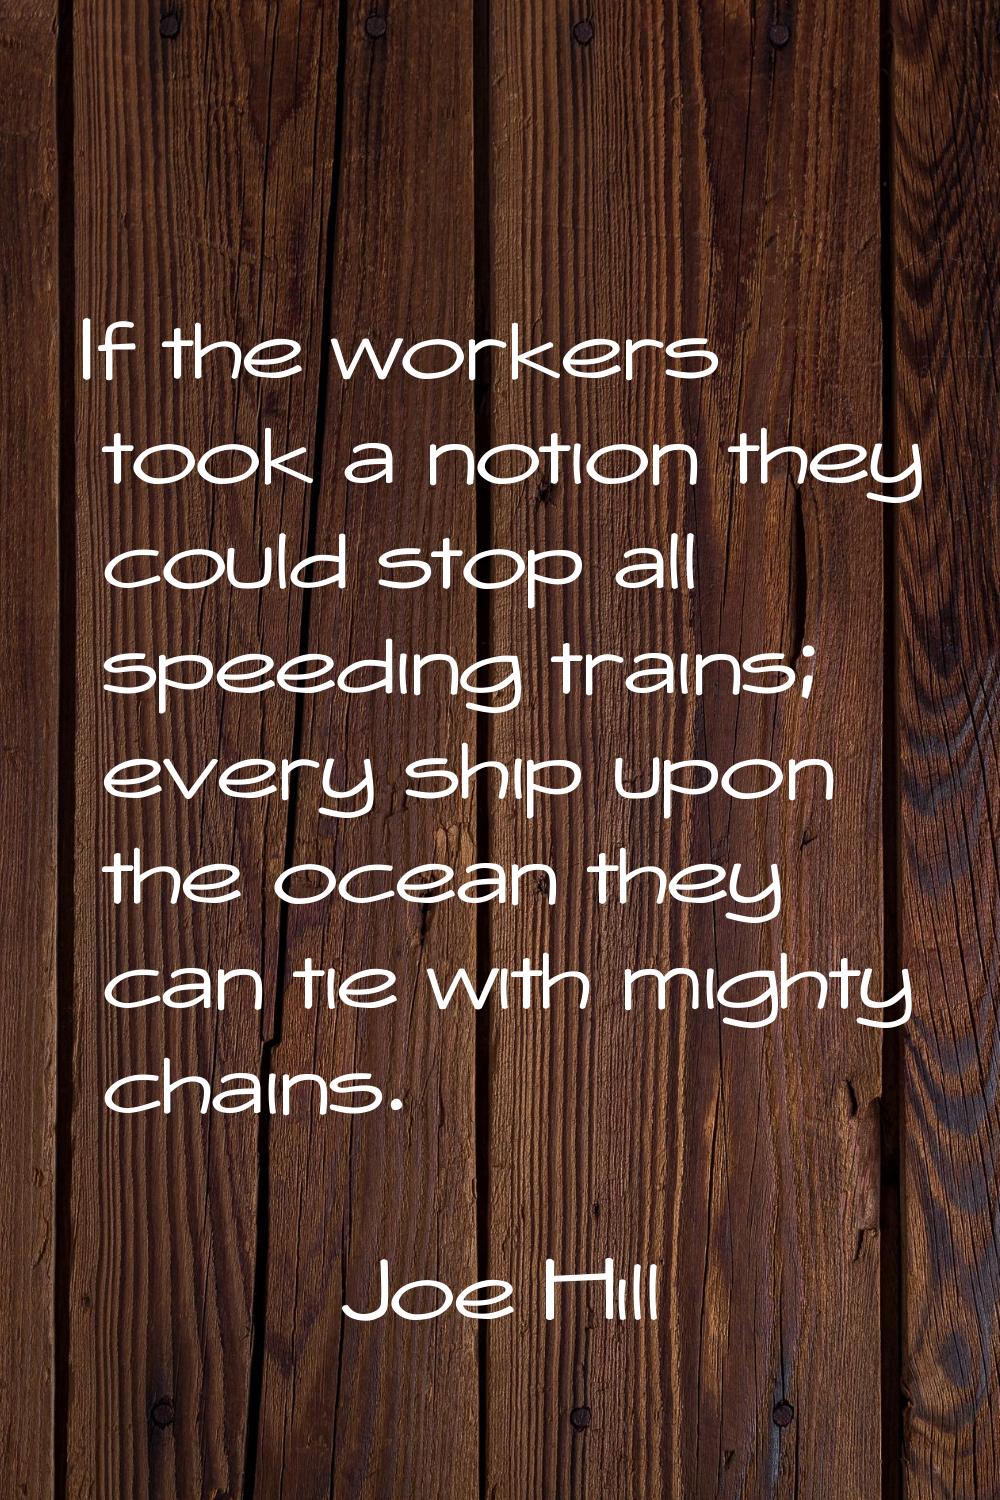 If the workers took a notion they could stop all speeding trains; every ship upon the ocean they ca